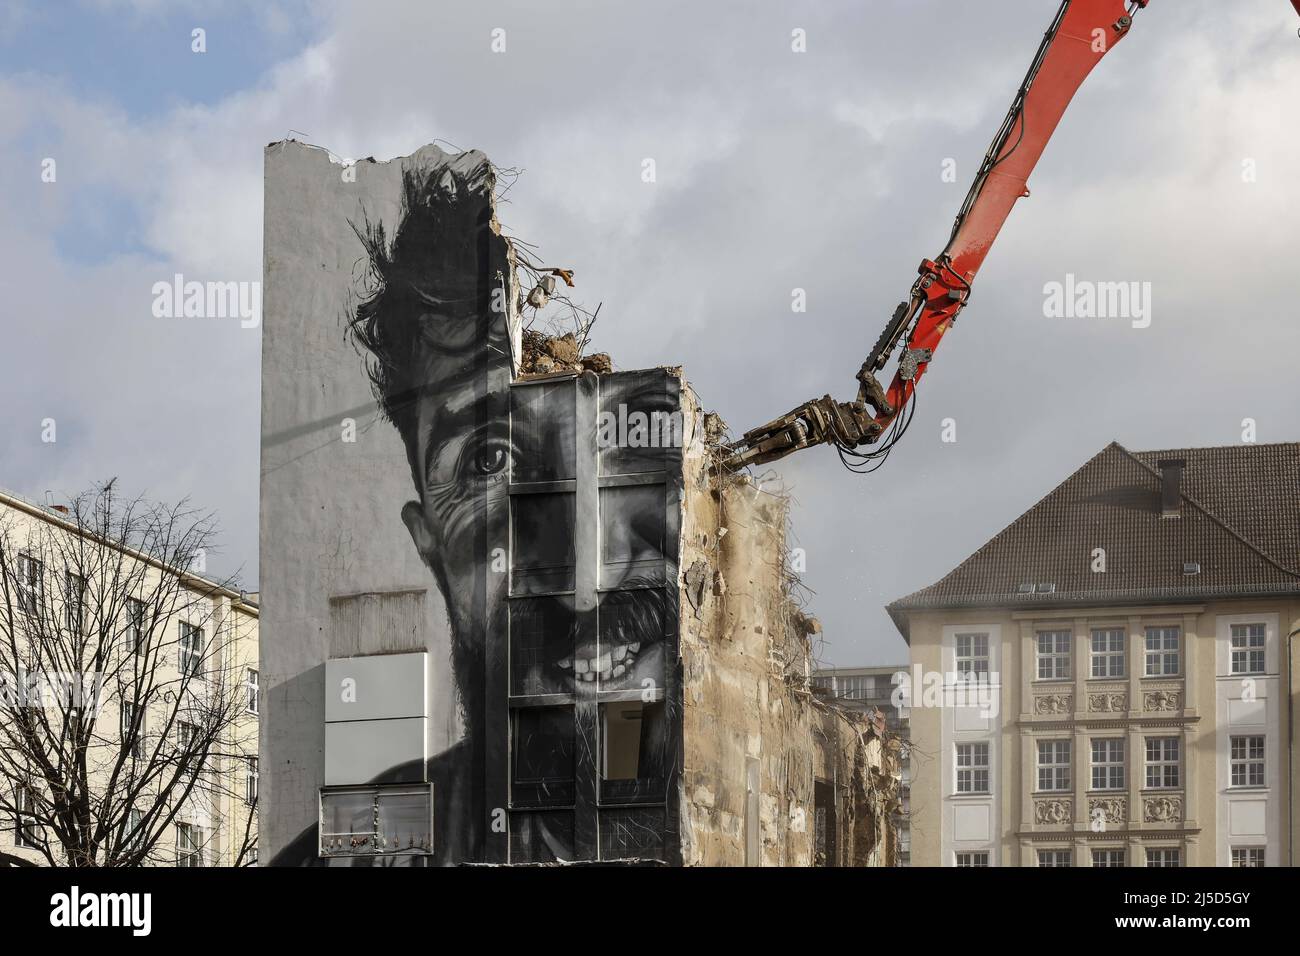 'Berlin, 07.02.2022 - An administrative building from the 60s is demolished with a demolition machine in the district of Berlin Schoeneberg. The last weeks before the demolition, the building was decorated with a portrait of the worker Miriam M., who was portrayed for the exhibition ''Eyes on Concrete''. [automated translation]' Stock Photo